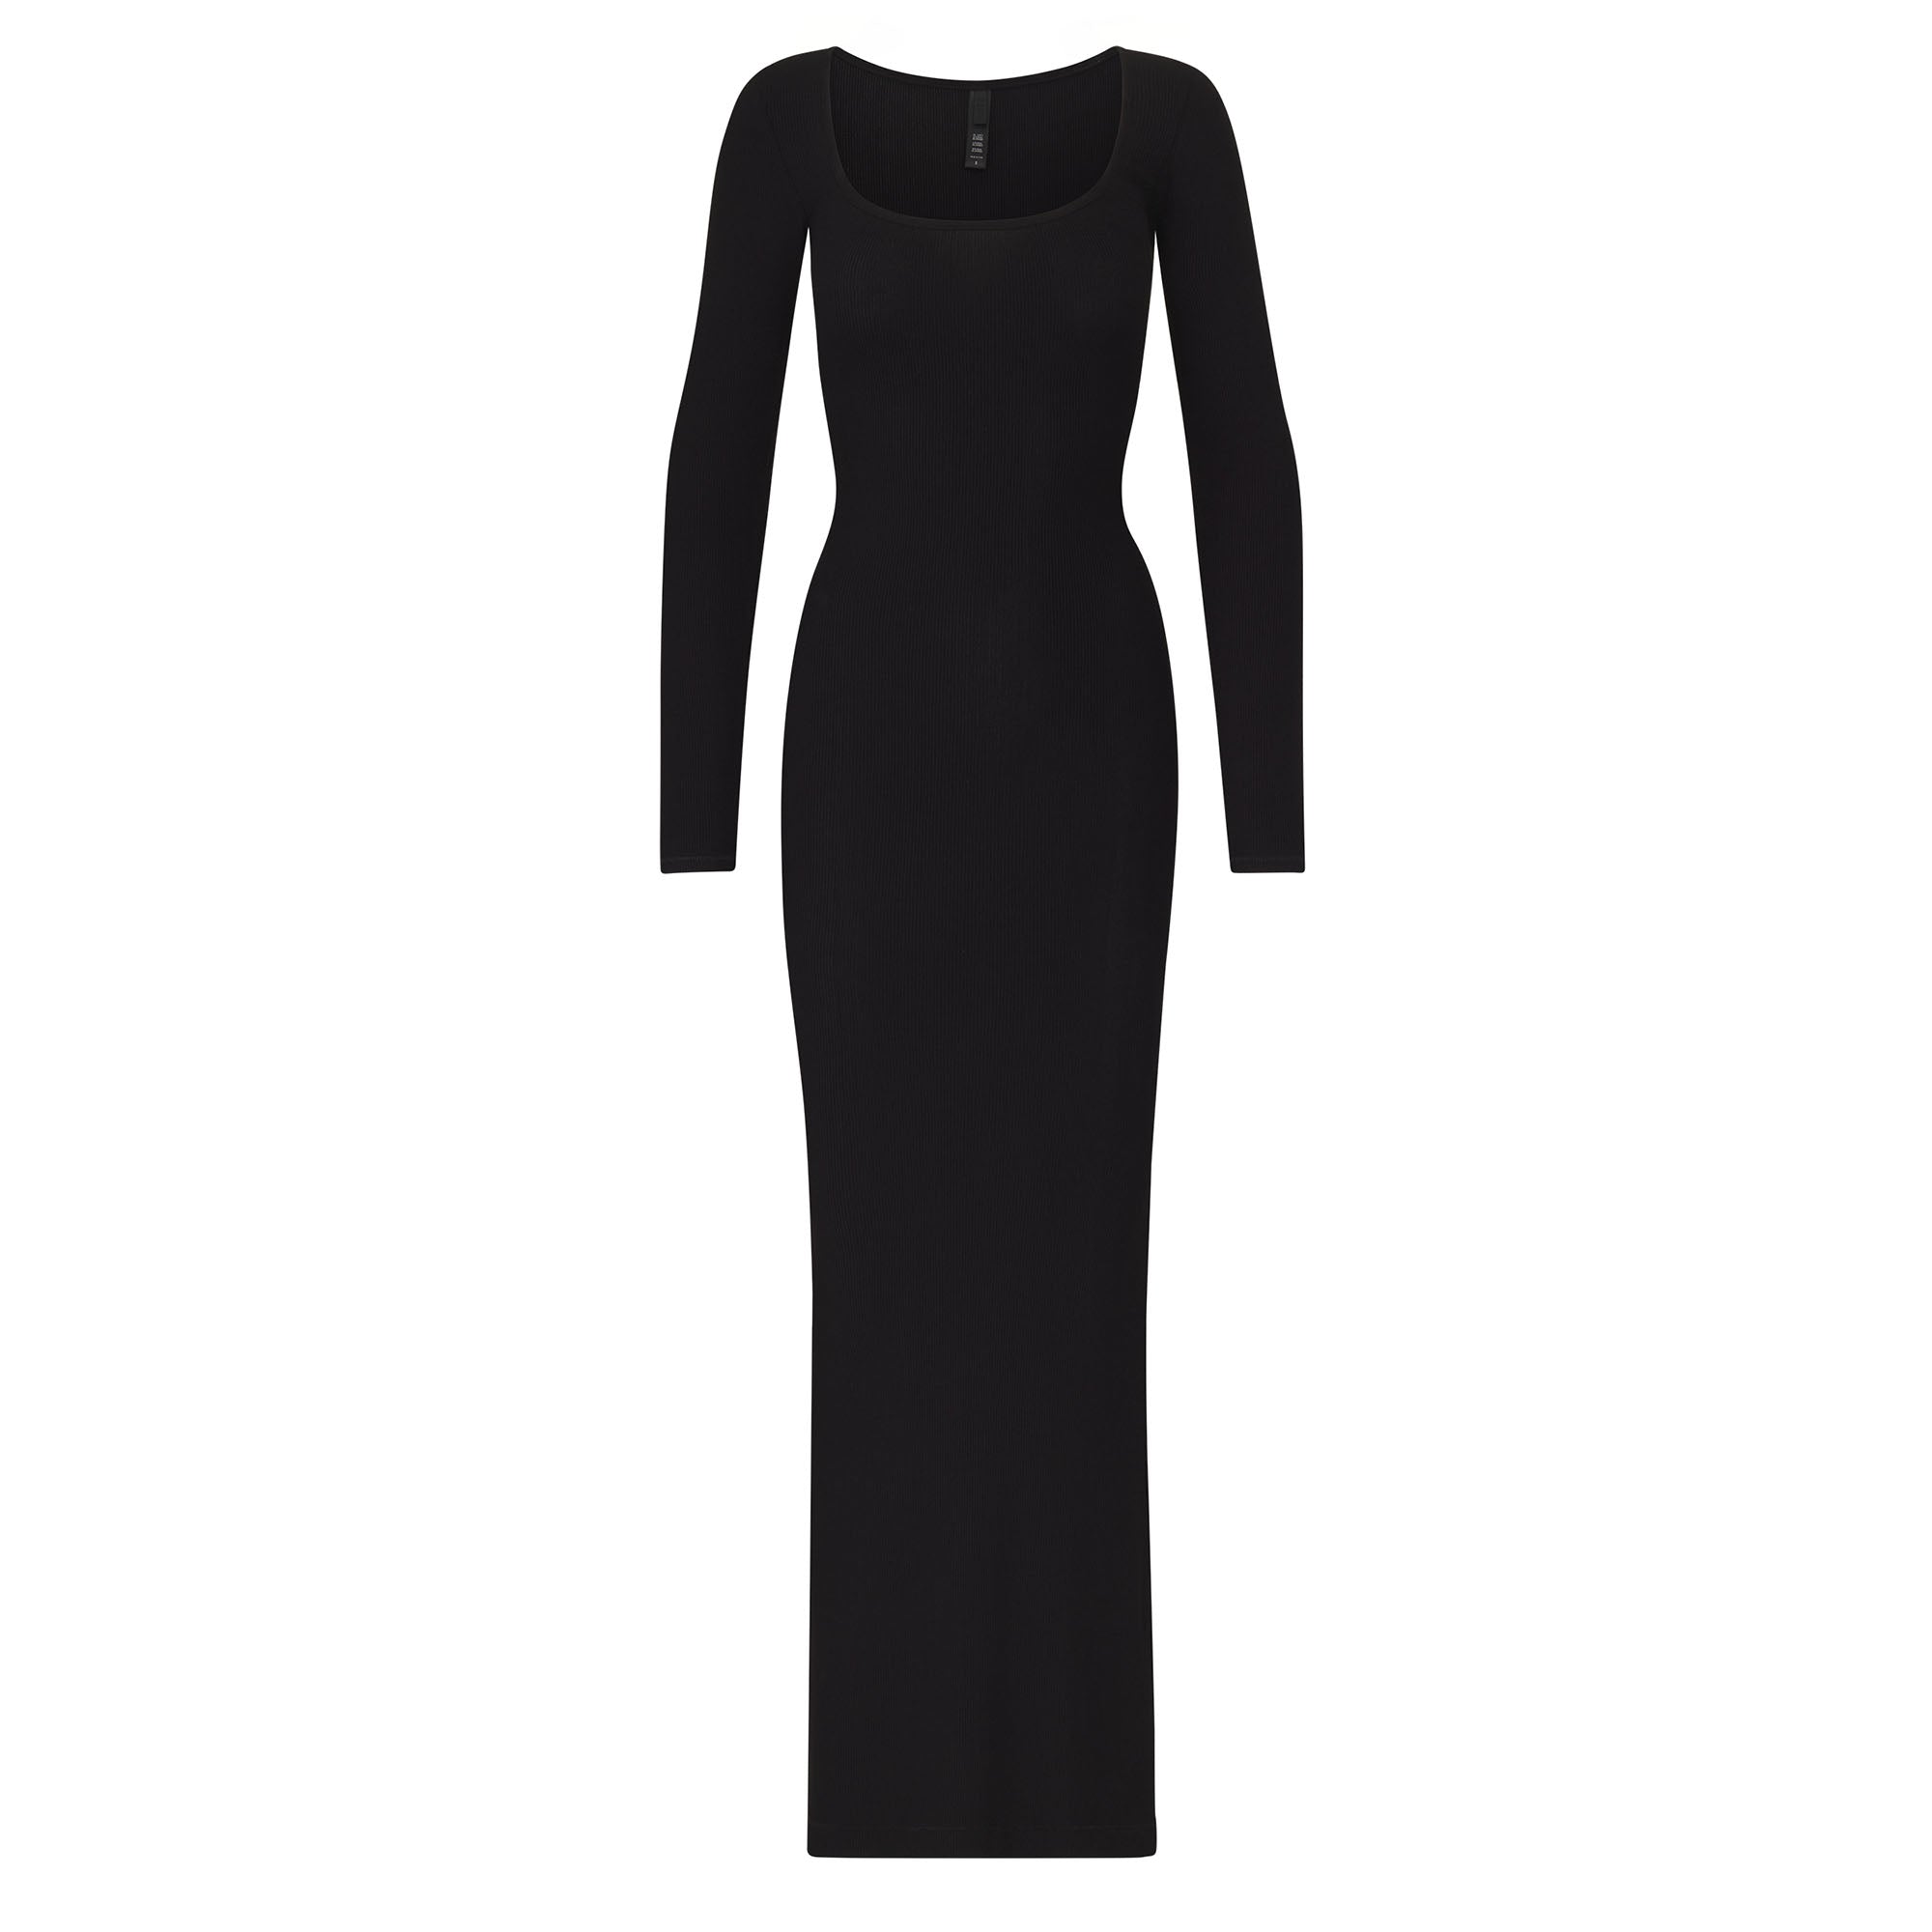 Black Ribbed Side Cut Out Long Sleeve Maxi Dress